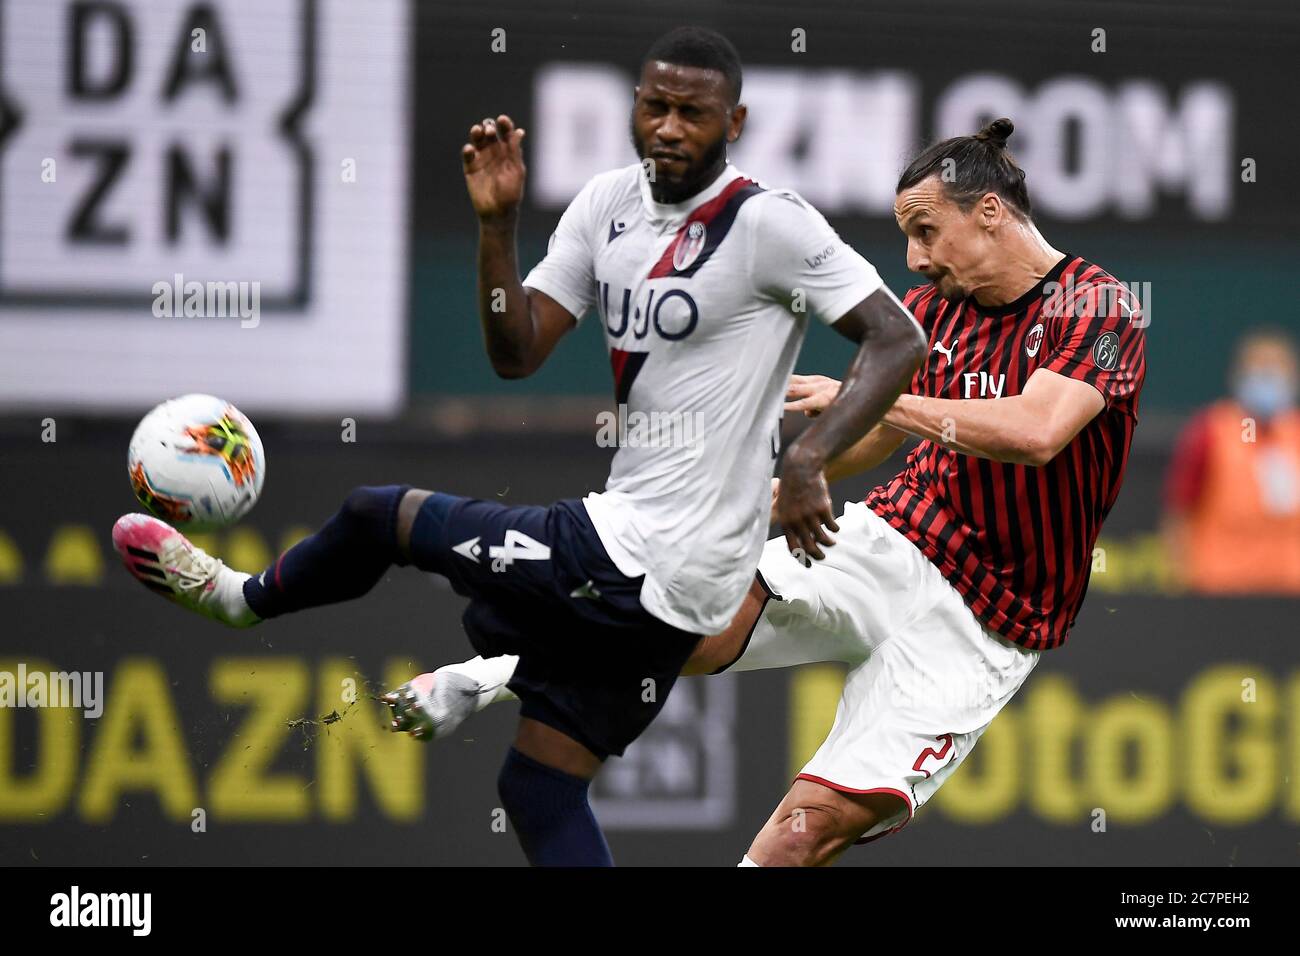 Milan, Italy. 18th July, 2020. MILAN, ITALY - July 18, 2020: Zlatan Ibrahimovic of AC Milan and Stefano Denswil of Bologna FC in action during the Serie A football match between AC Milan and Bologna FC. AC Milan won 5-1 over Bologna FC. (Photo by Nicolò Campo/Sipa USA) Credit: Sipa USA/Alamy Live News Stock Photo